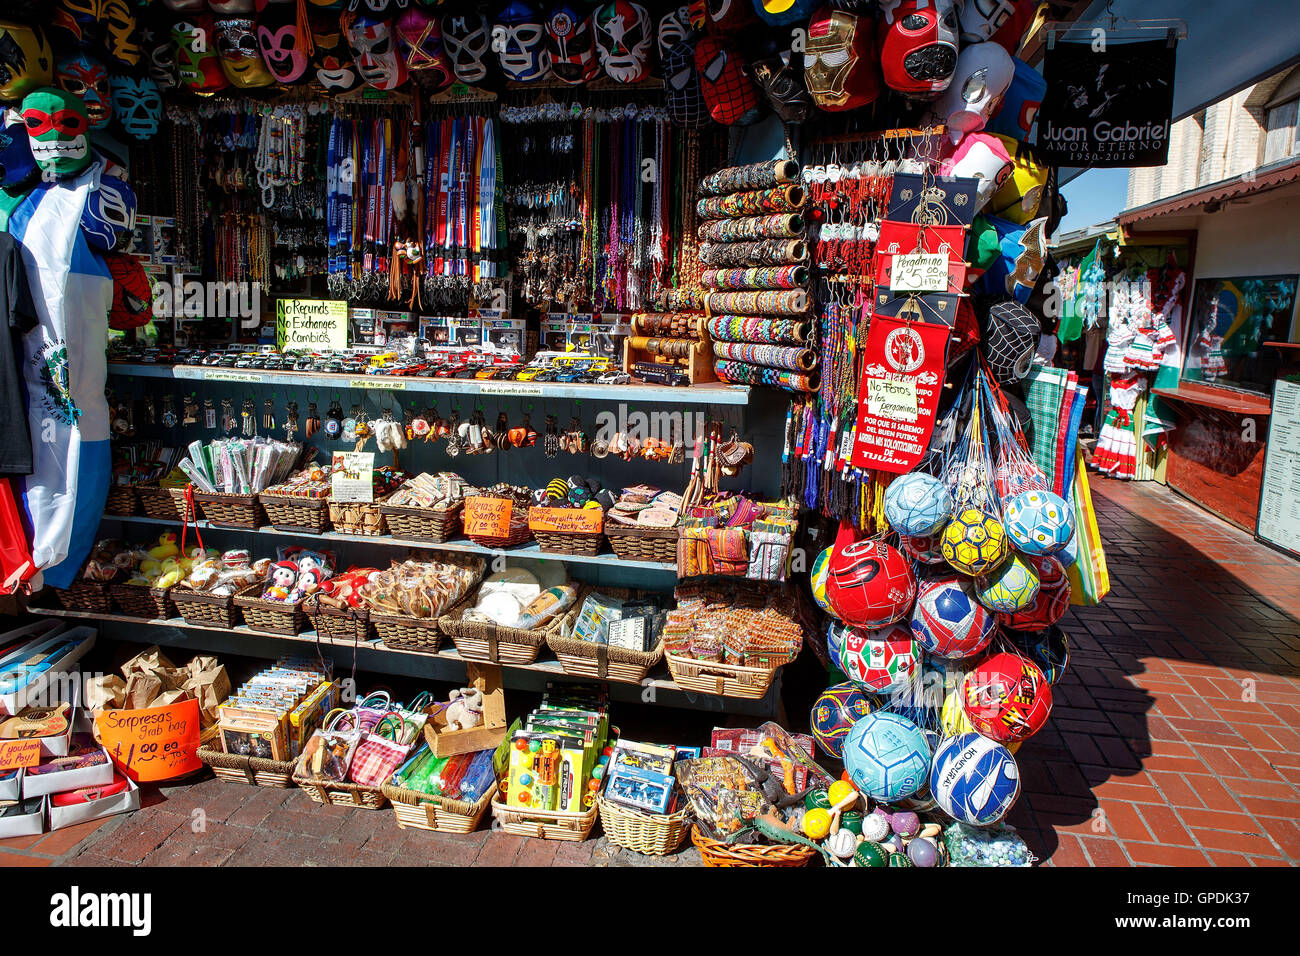 Souvenirs for sale in the market on Olivera Street, Los Angeles Stock